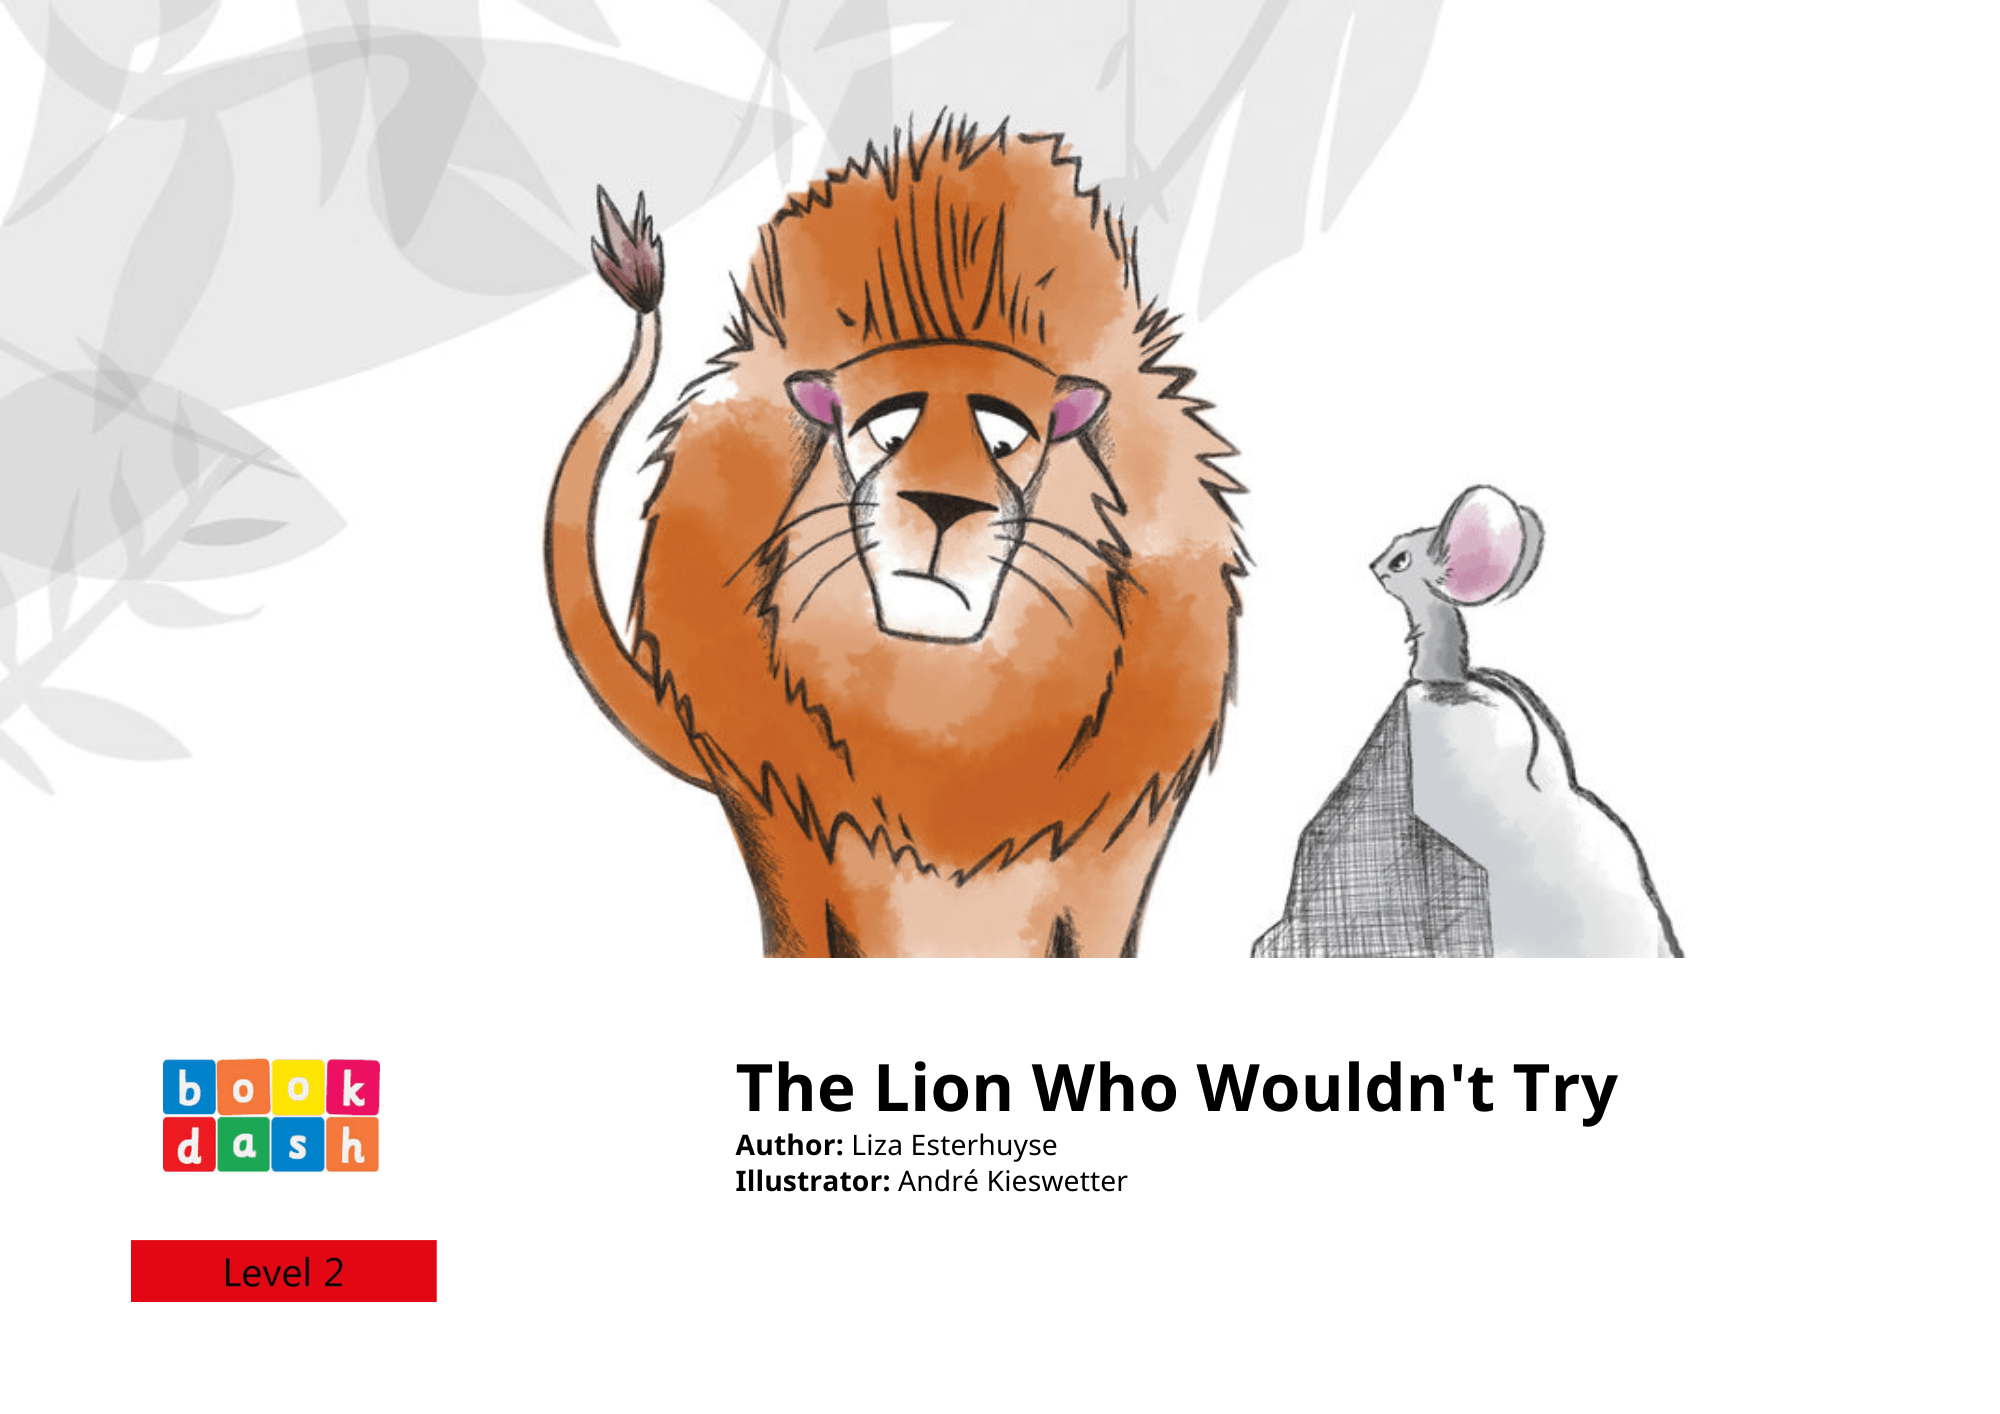 The Lion Who Wouldn’t Try